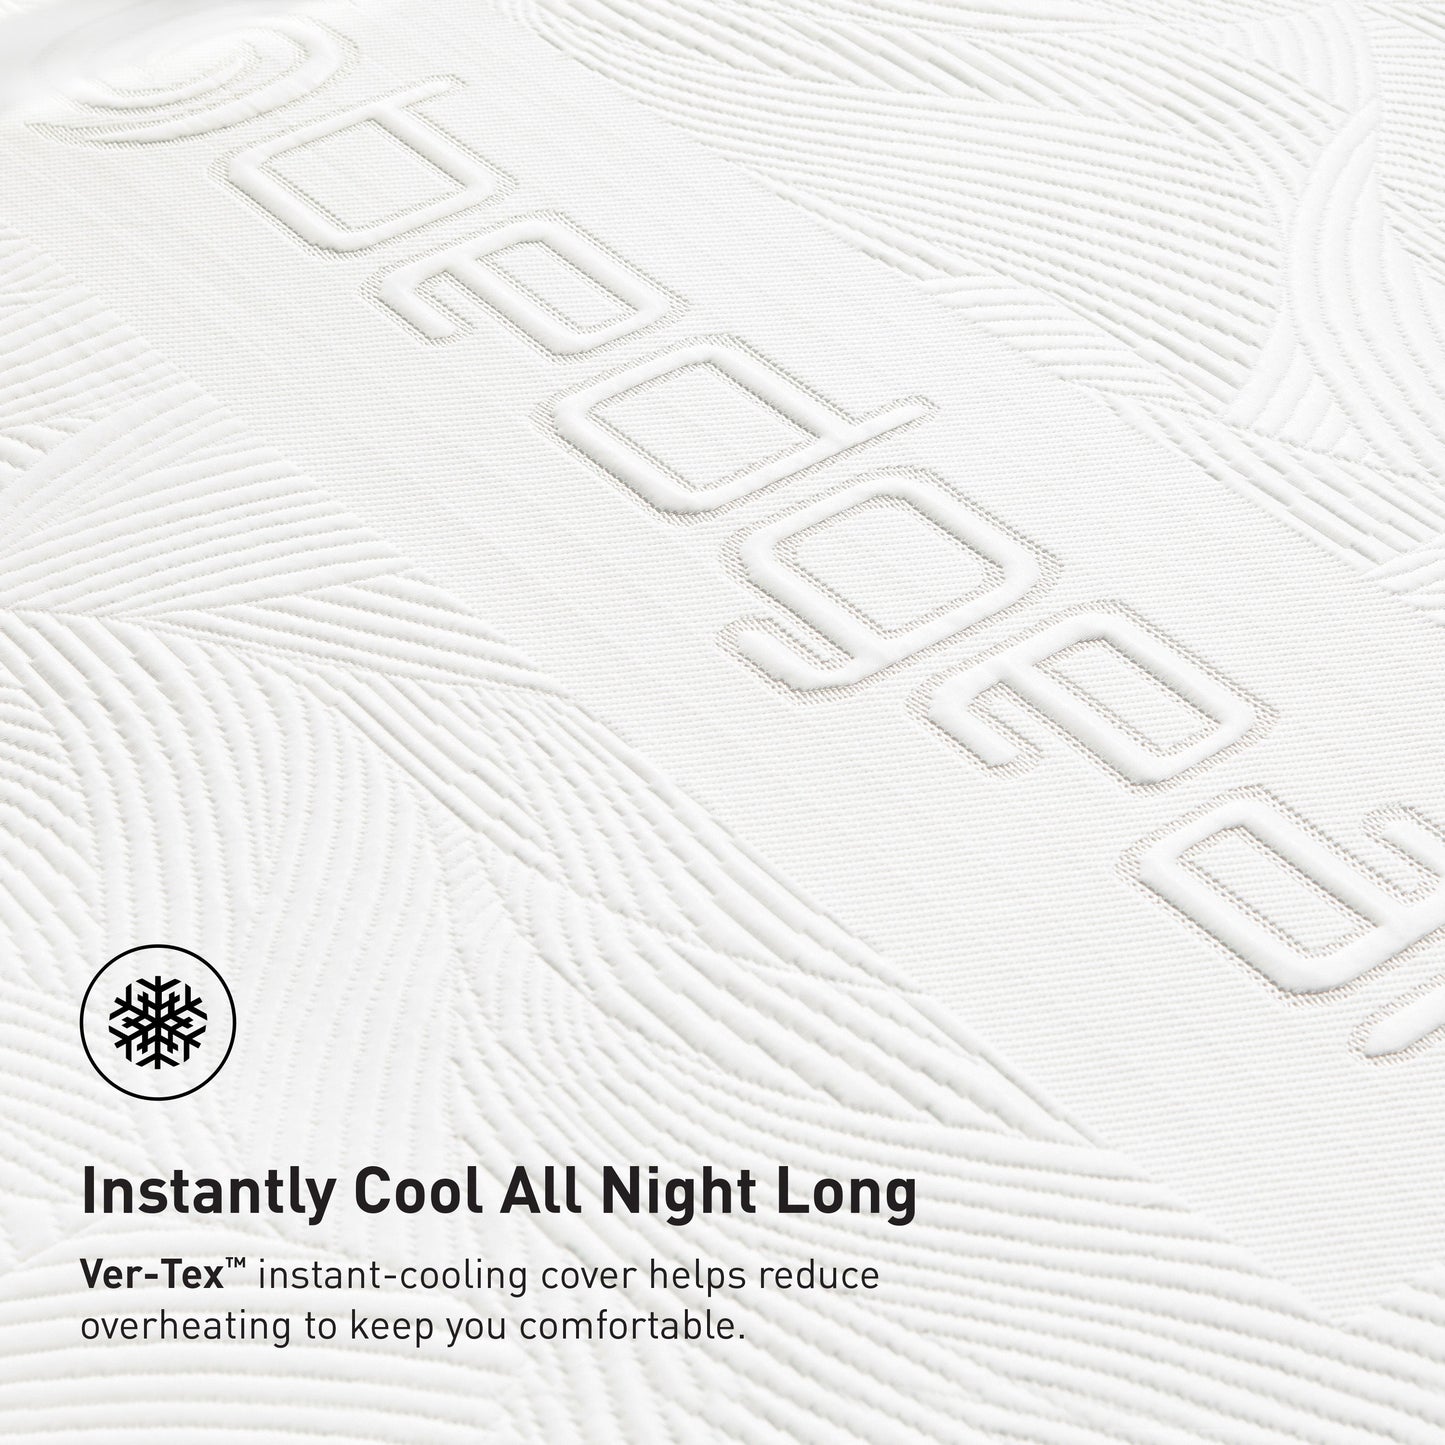 Bedgear S7 II Performance Mattress Instantly Cool All Night Long